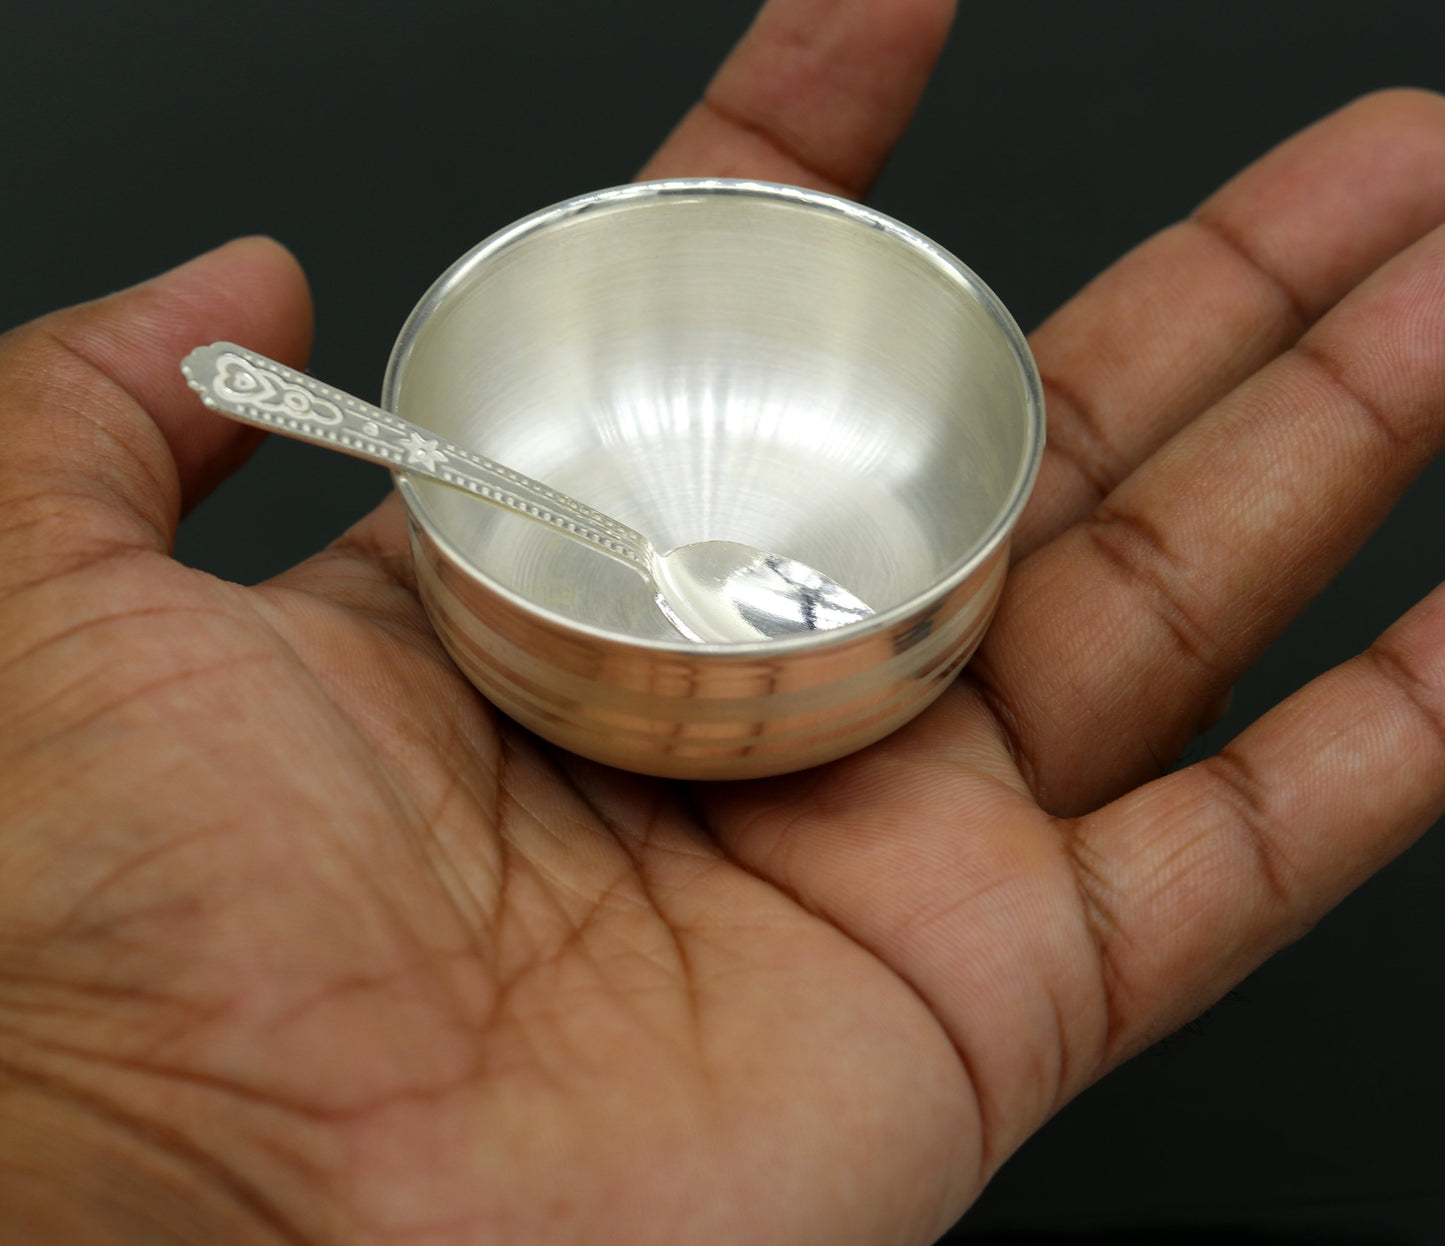 999 fine silver handmade bowl and spoon set, silver has antibacterial properties,stay baby/kids healthy, silver vessels utensils sv48 - TRIBAL ORNAMENTS